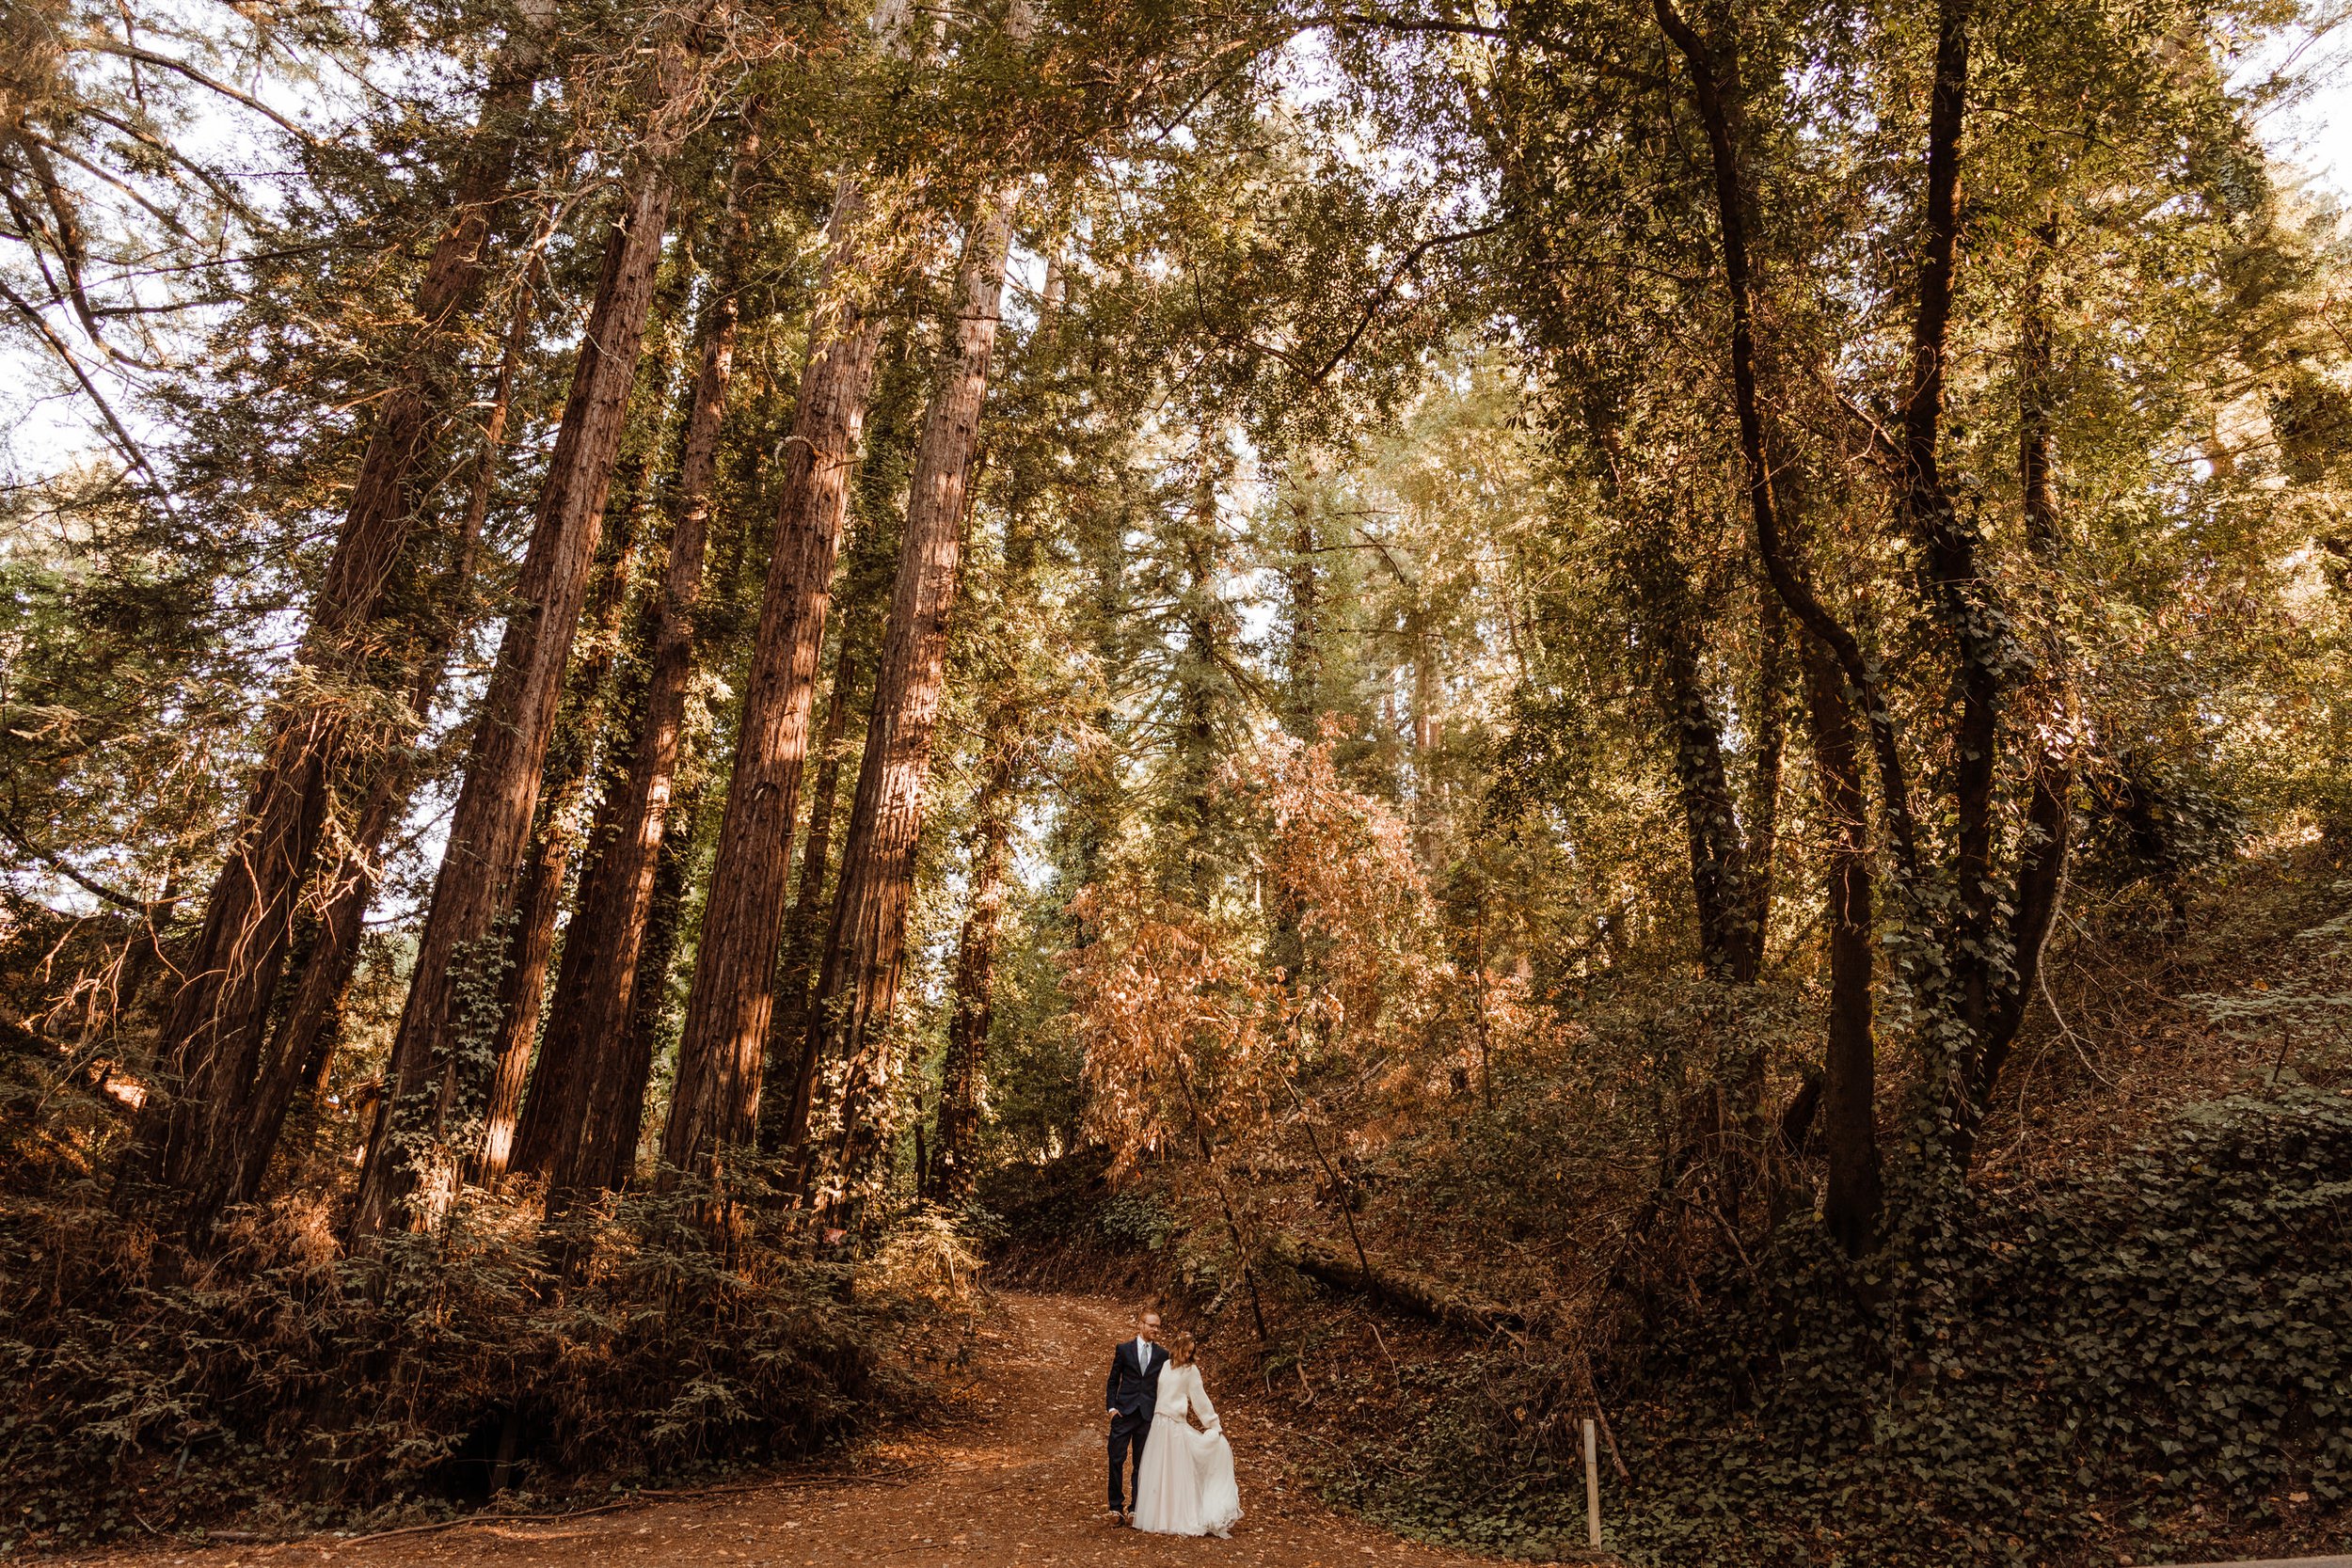 Wedding-in-the-Woods-Bride-and-Groom-Sunlit-Pictures-Beneath-Redwood-Forest (2).jpg